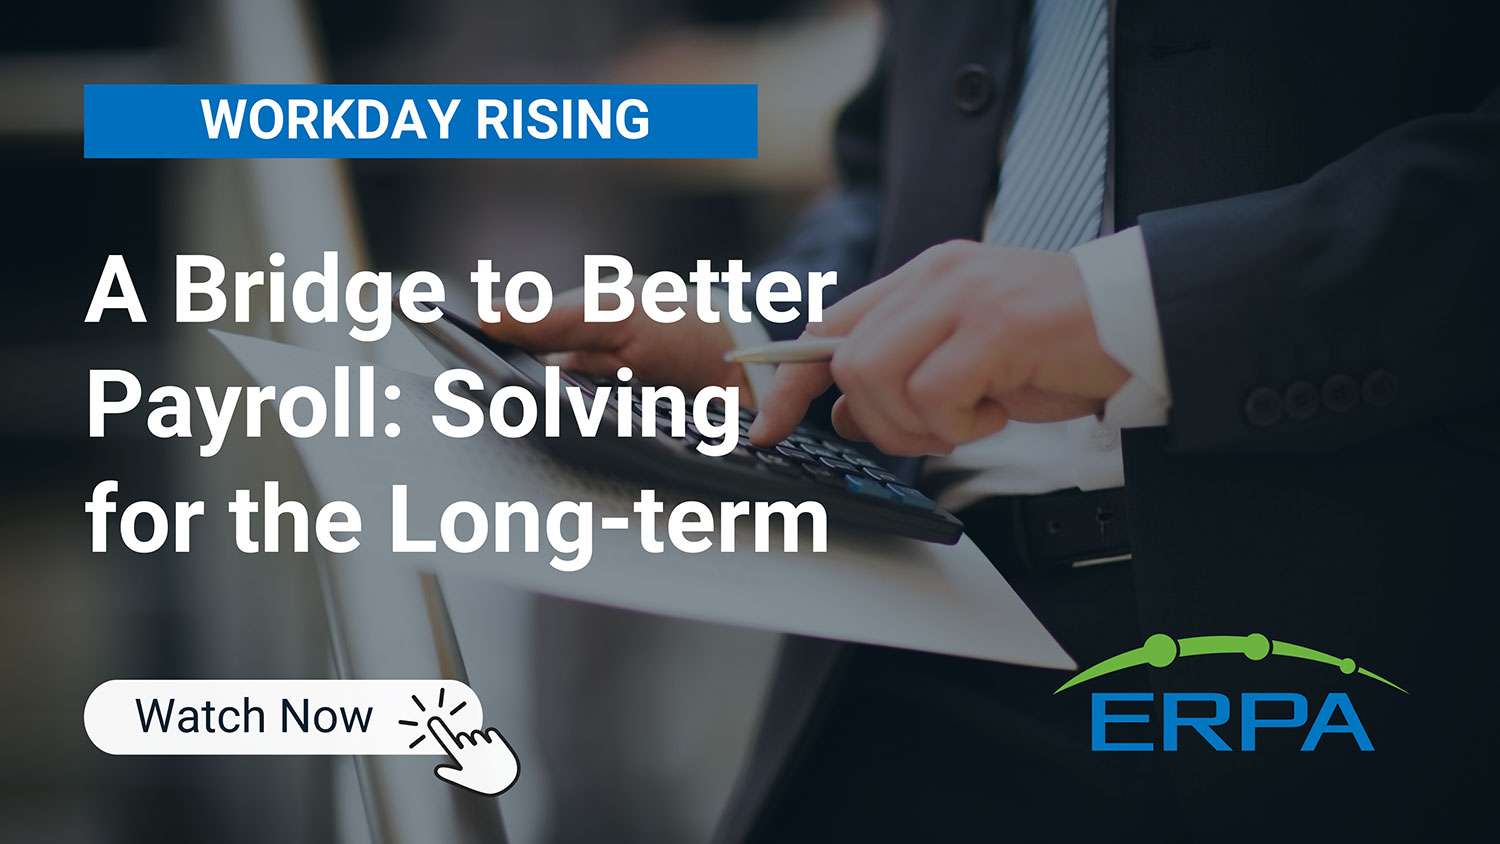 ERPA Workday Rising 2023: A Bridge to Better Payroll